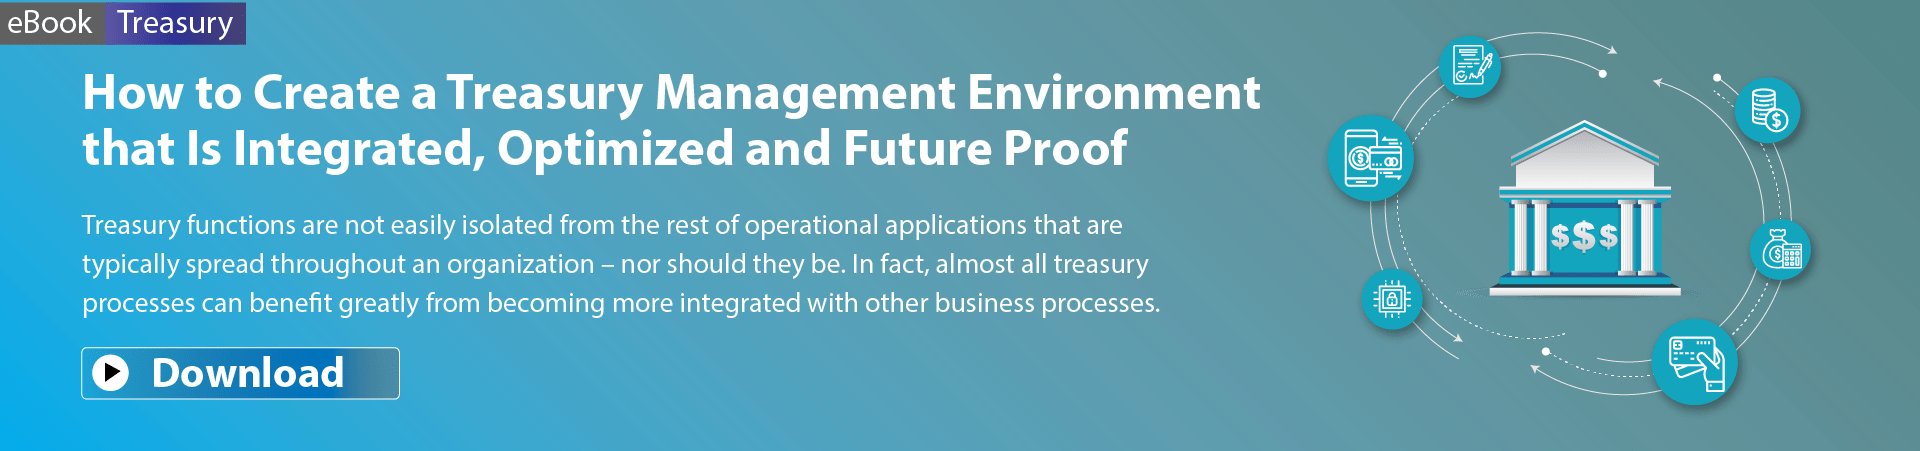 How to create a Treasury Management Environment Banner